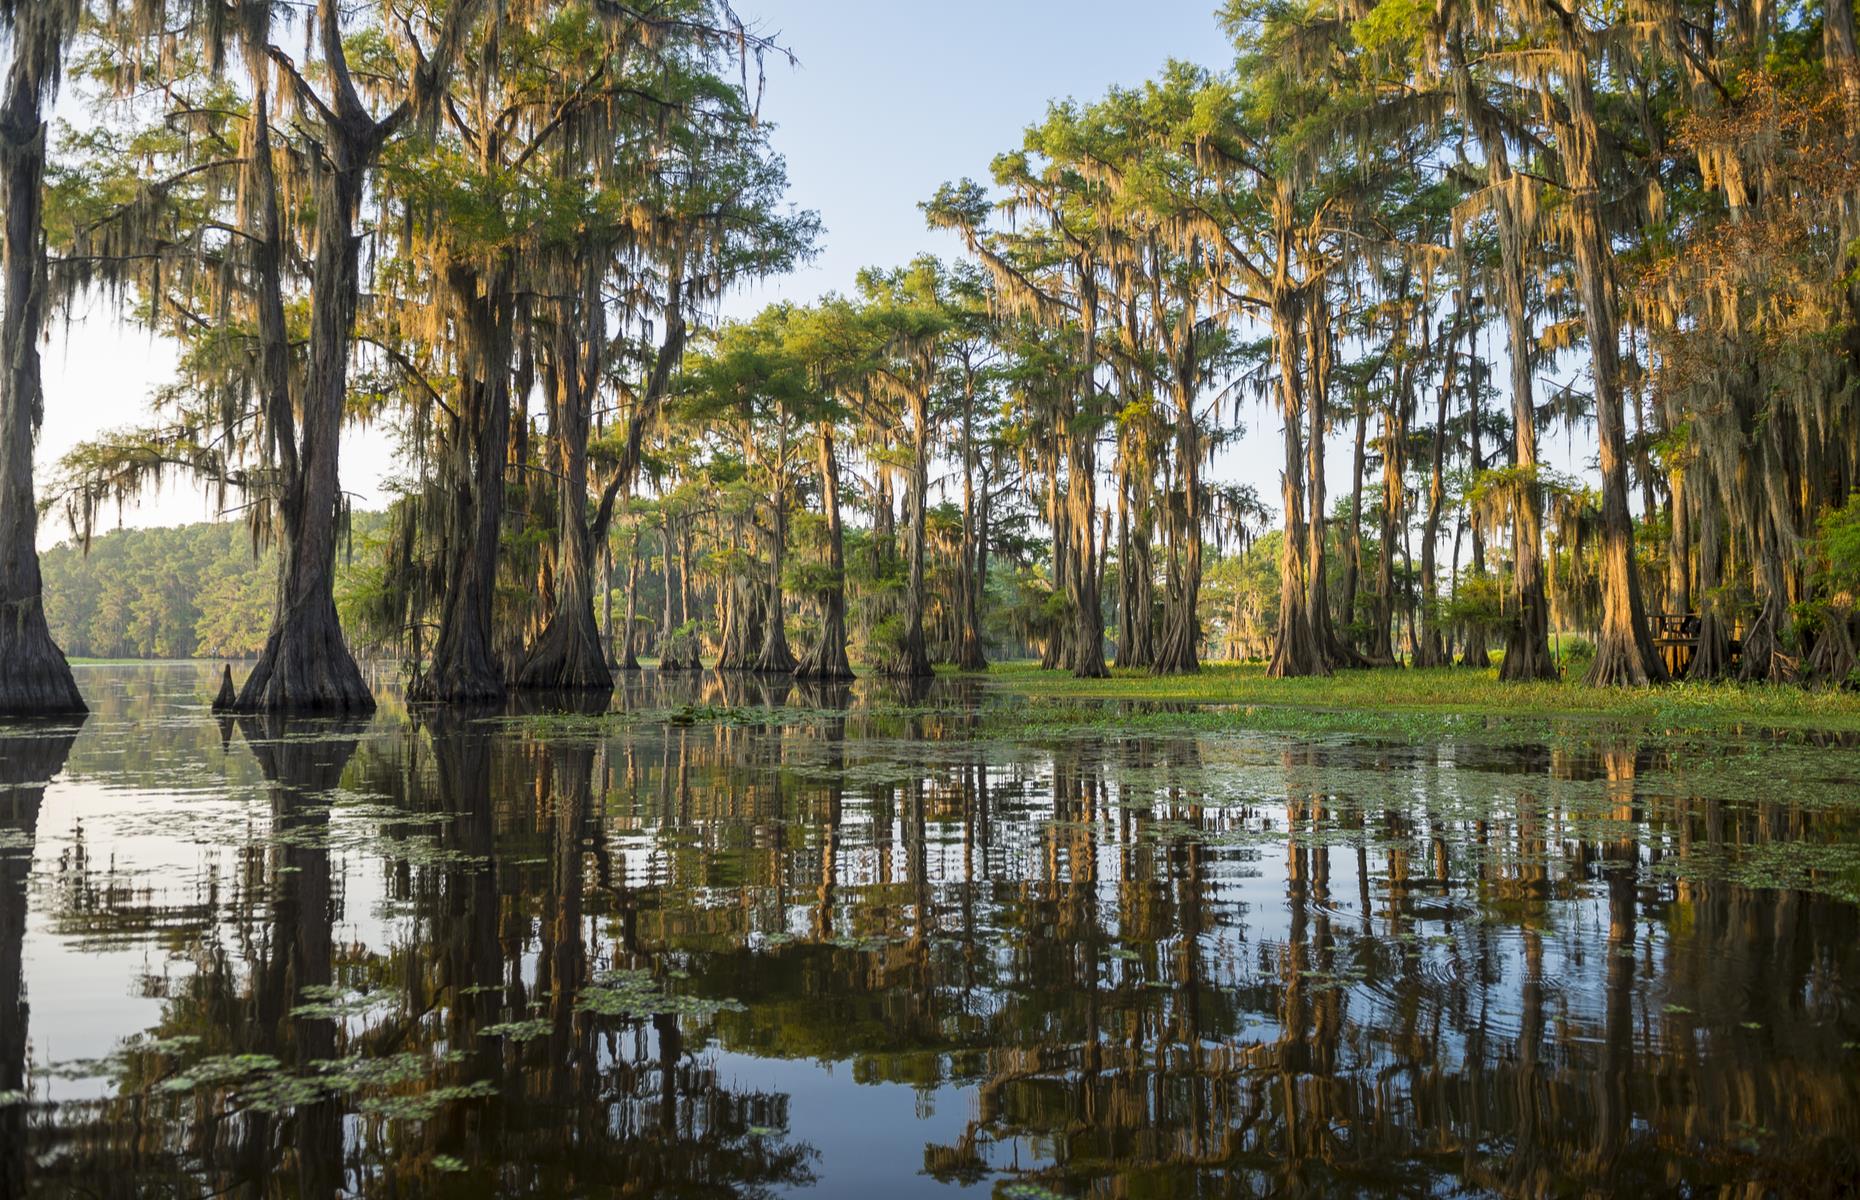 Slide 98 of 100: Caddo Lake unfurls across the Louisiana-Texas border, spreading out for an incredible 25,400 acres. This glorious wetland area is best known for being home to an enormous Spanish moss-drenched cypress forest, tipped as the largest in the world. American alligators lurk beneath the canopy too, usually on the hunt for fish. Discover more of the world's stunning natural wonders here.